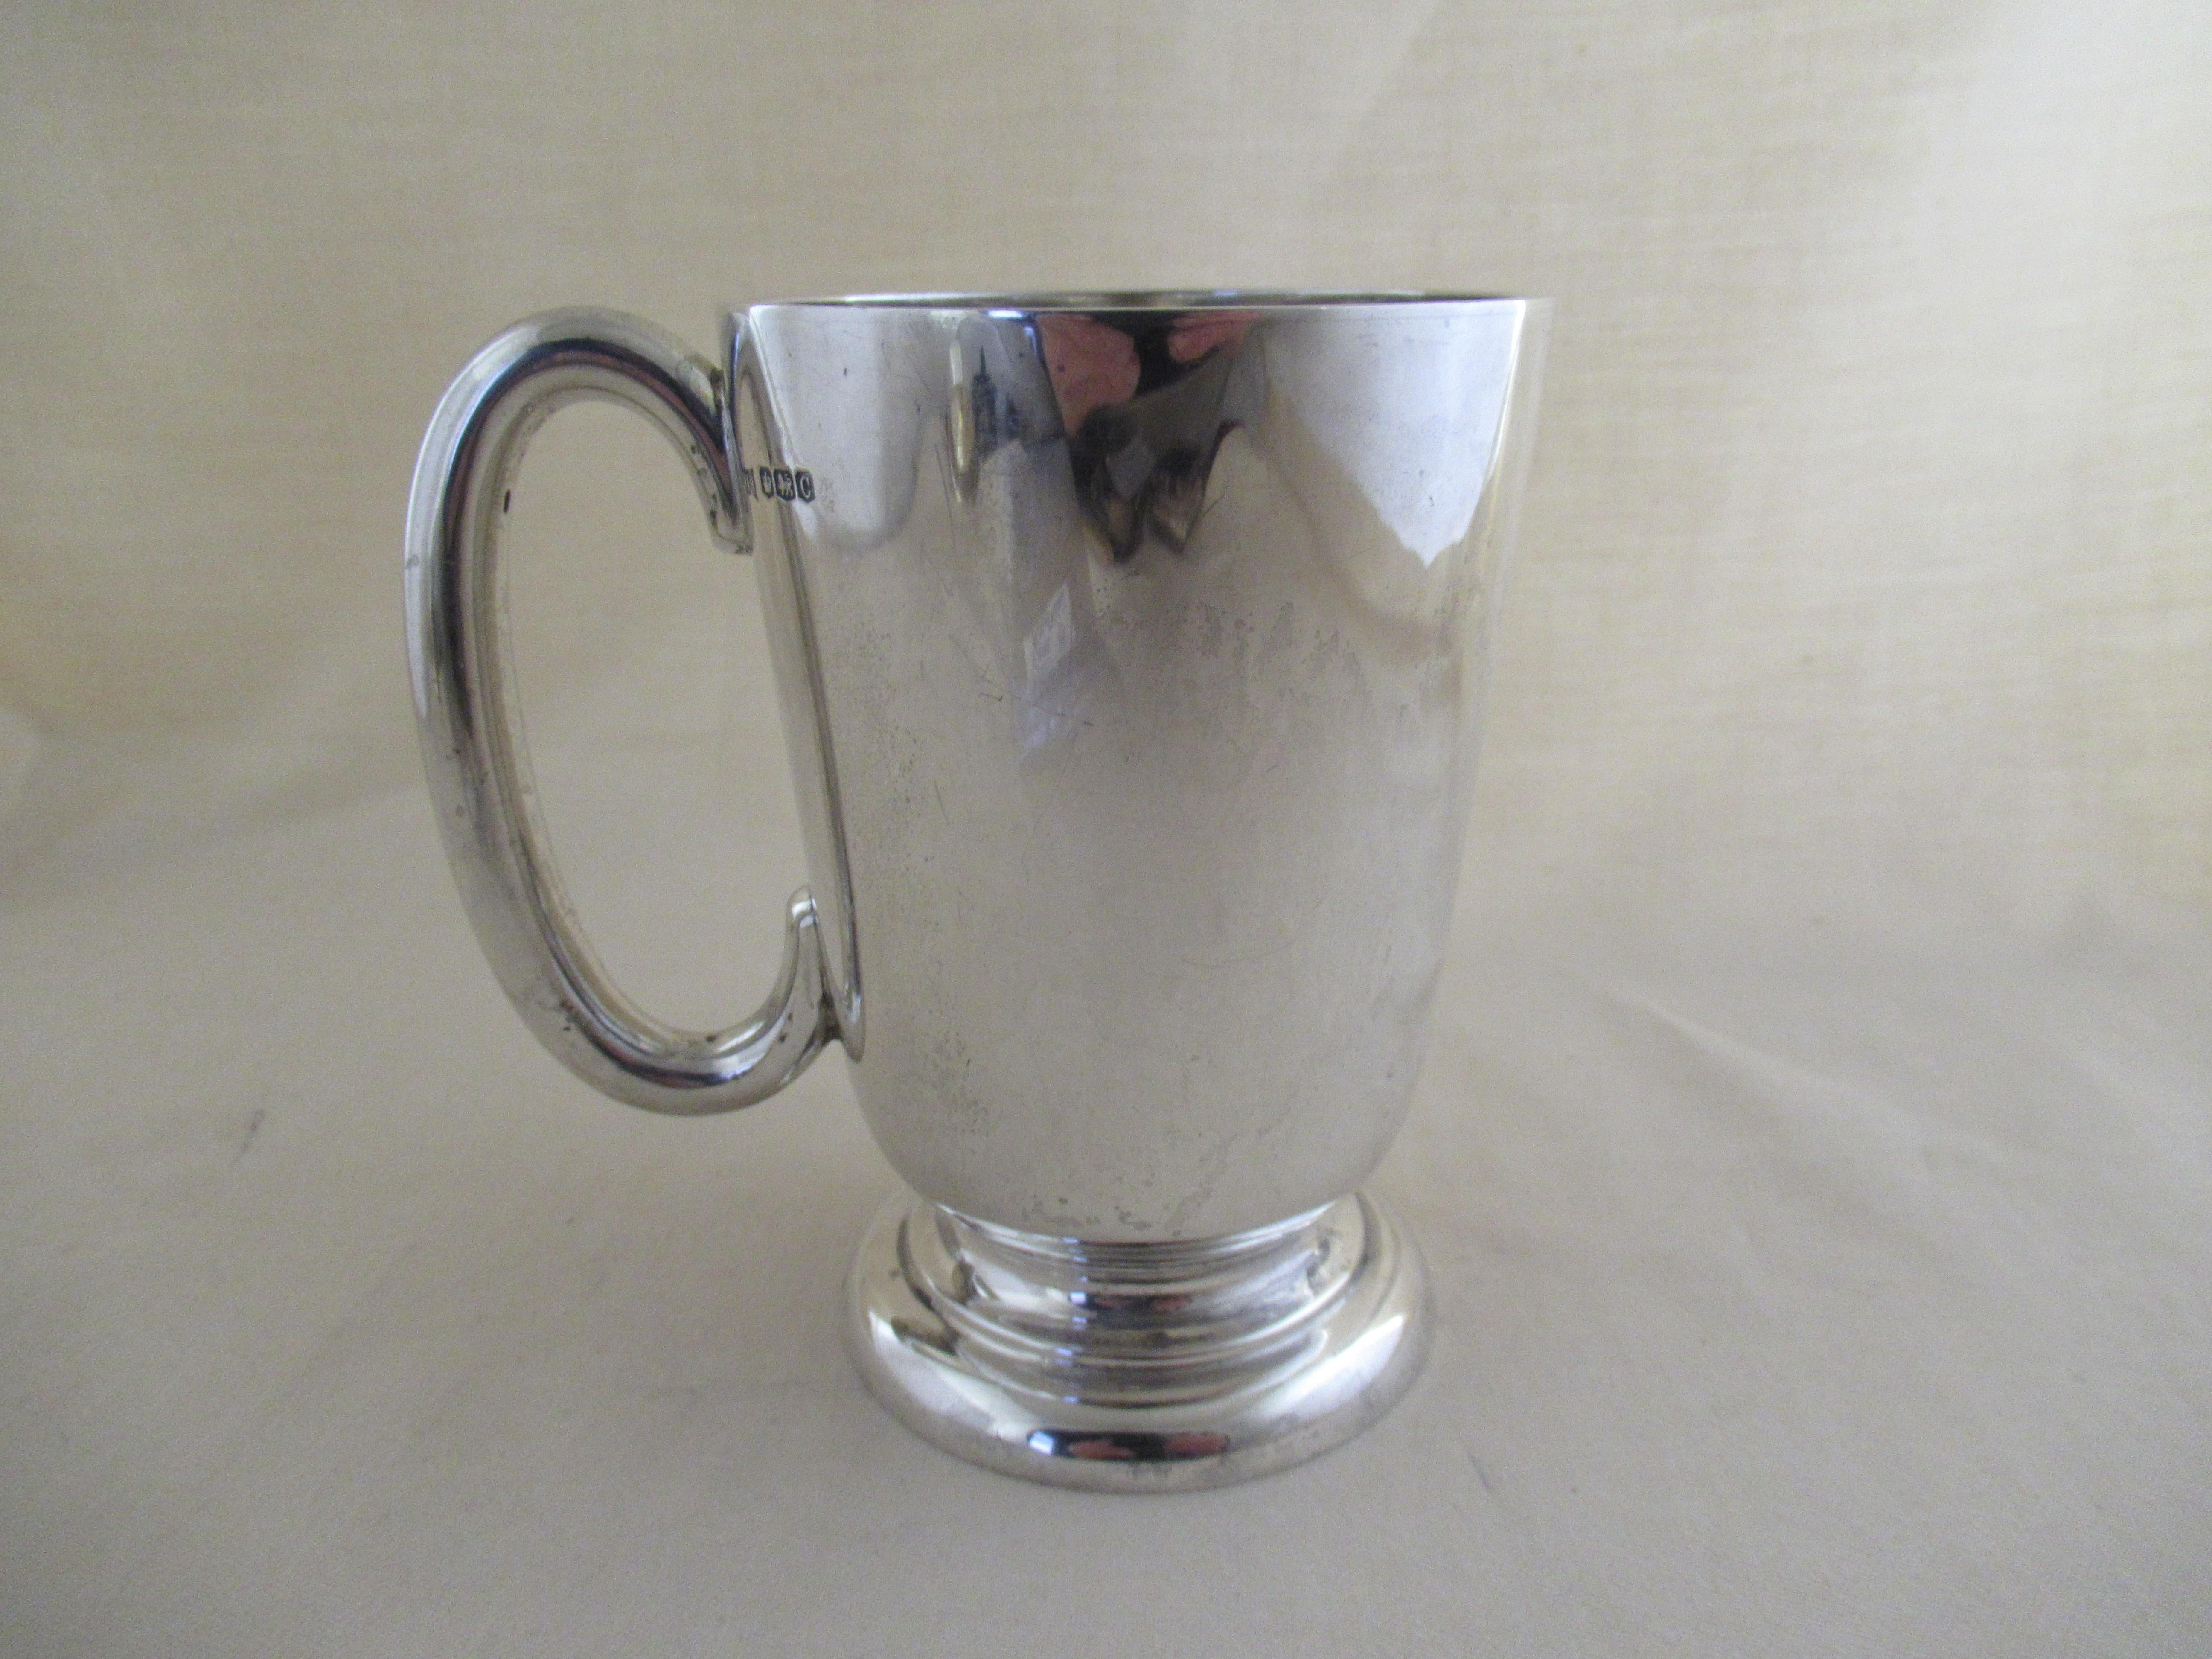 English sterling silver half pint mug made in 1945 - 77 years old
Full English hallmark for Sheffield 1945.
With the maker's mark - W & H, for Walker & Hall, Electro Works,
 Howard Street, Sheffield.

A delightful mug of traditional, tapering